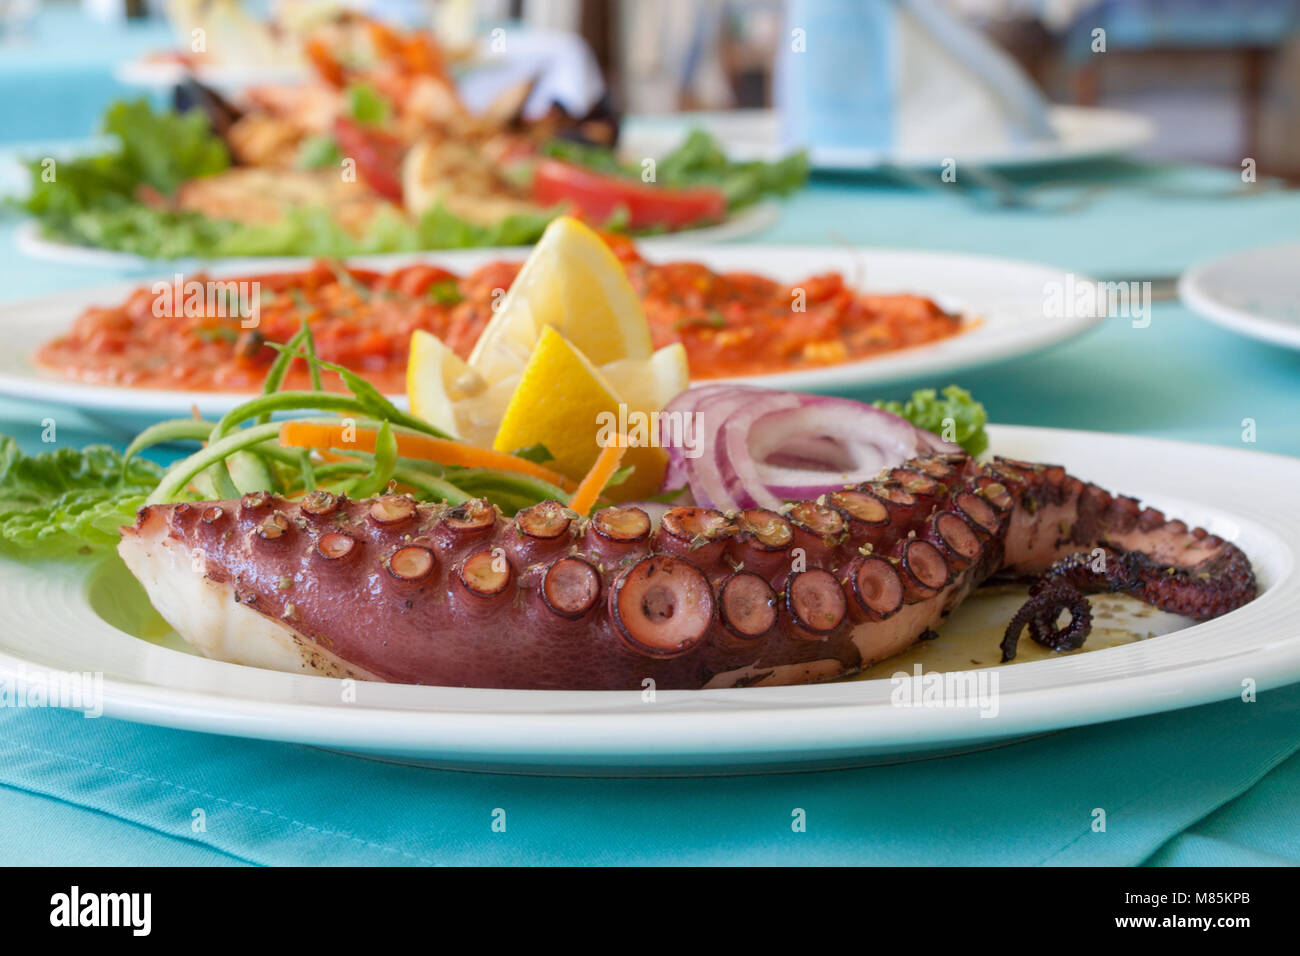 Meal Tentacle Octopus Stock Photo